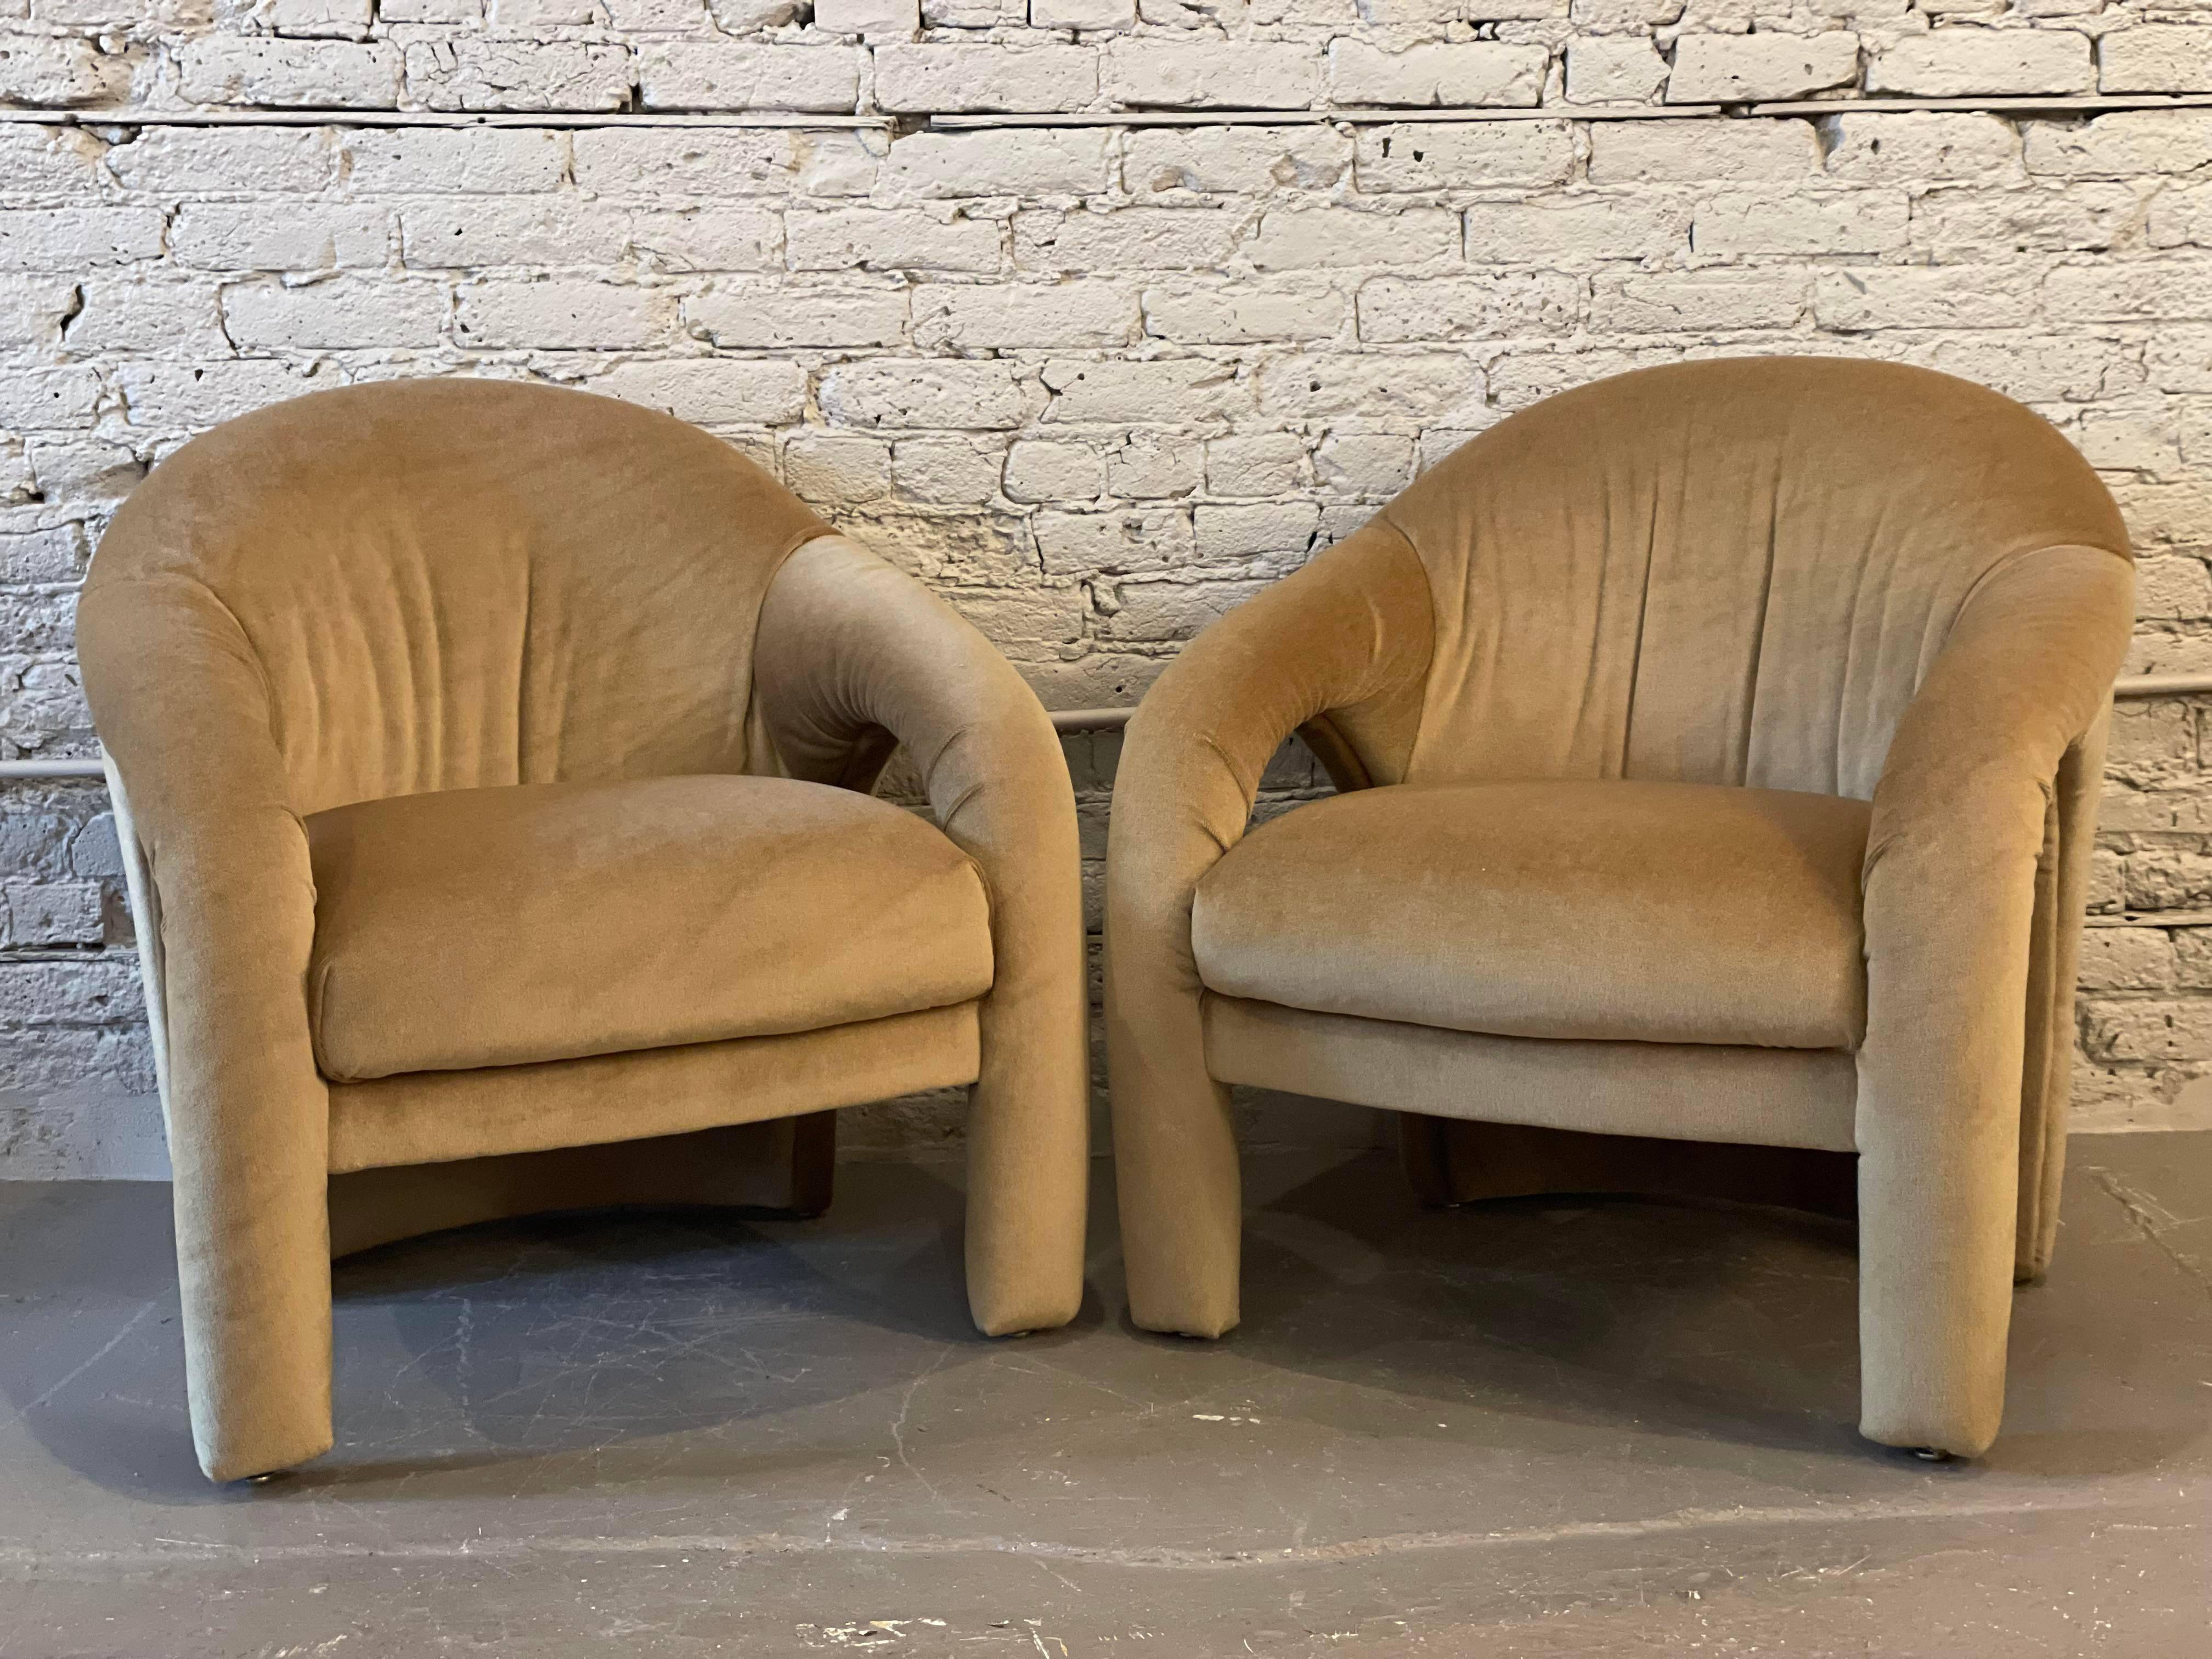 1980s Postmodern Arc Sculptural Chairs in Camel Mohair, a Pair For Sale 1